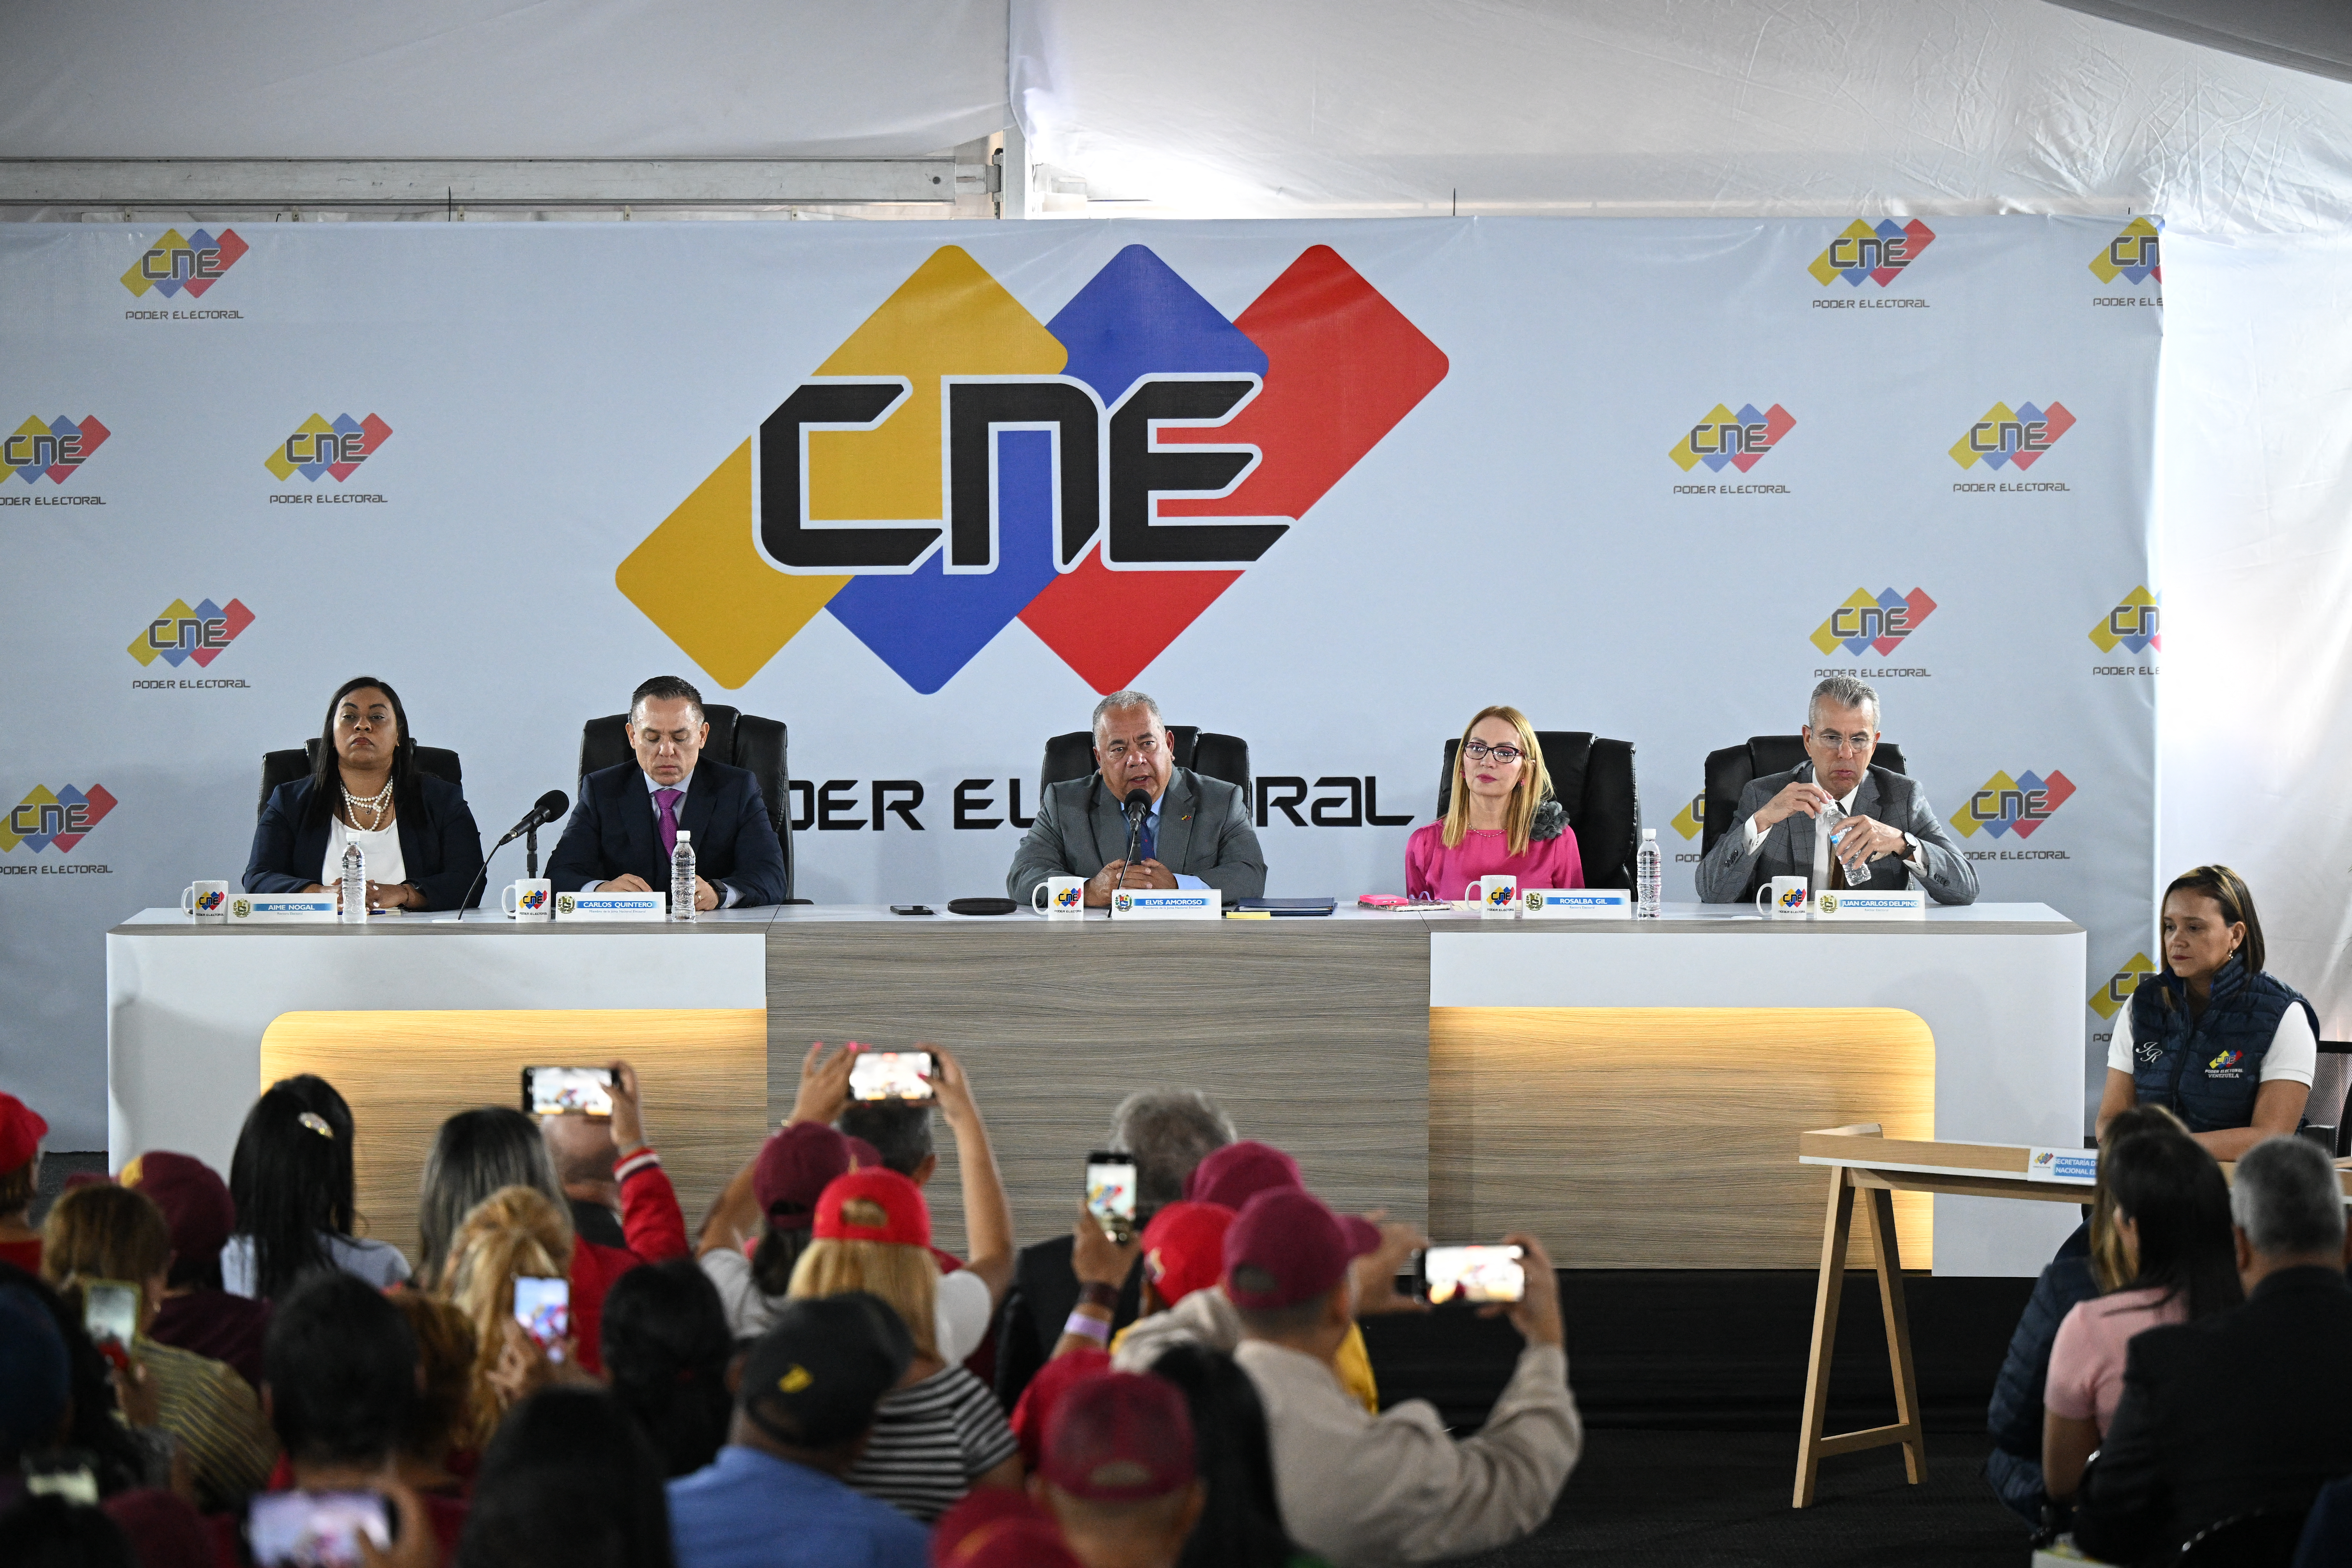 #CNE approves 13 candidates running in July 28 presidential election